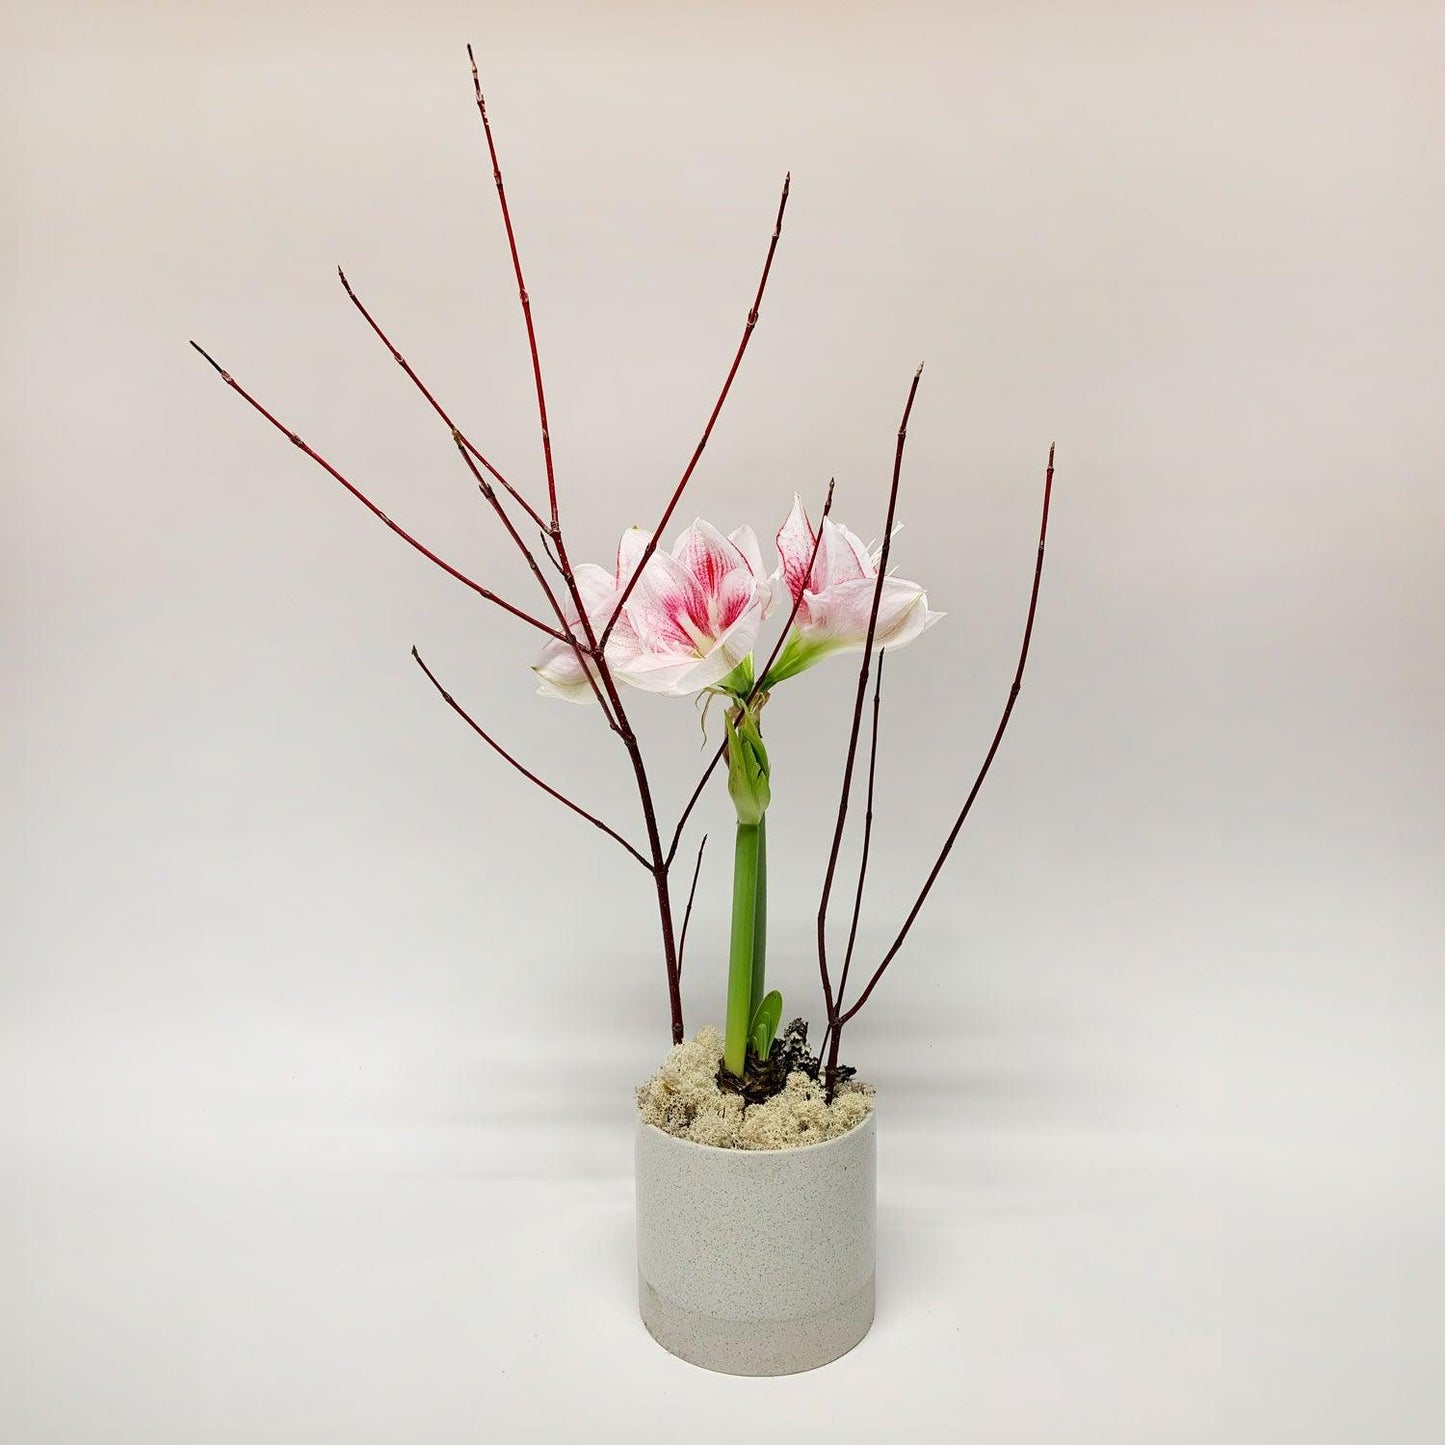 A potted amaryllis flower with long, slender red branches extending outward, set against a neutral background. Order online for flowers from the best florist in Toronto near you.